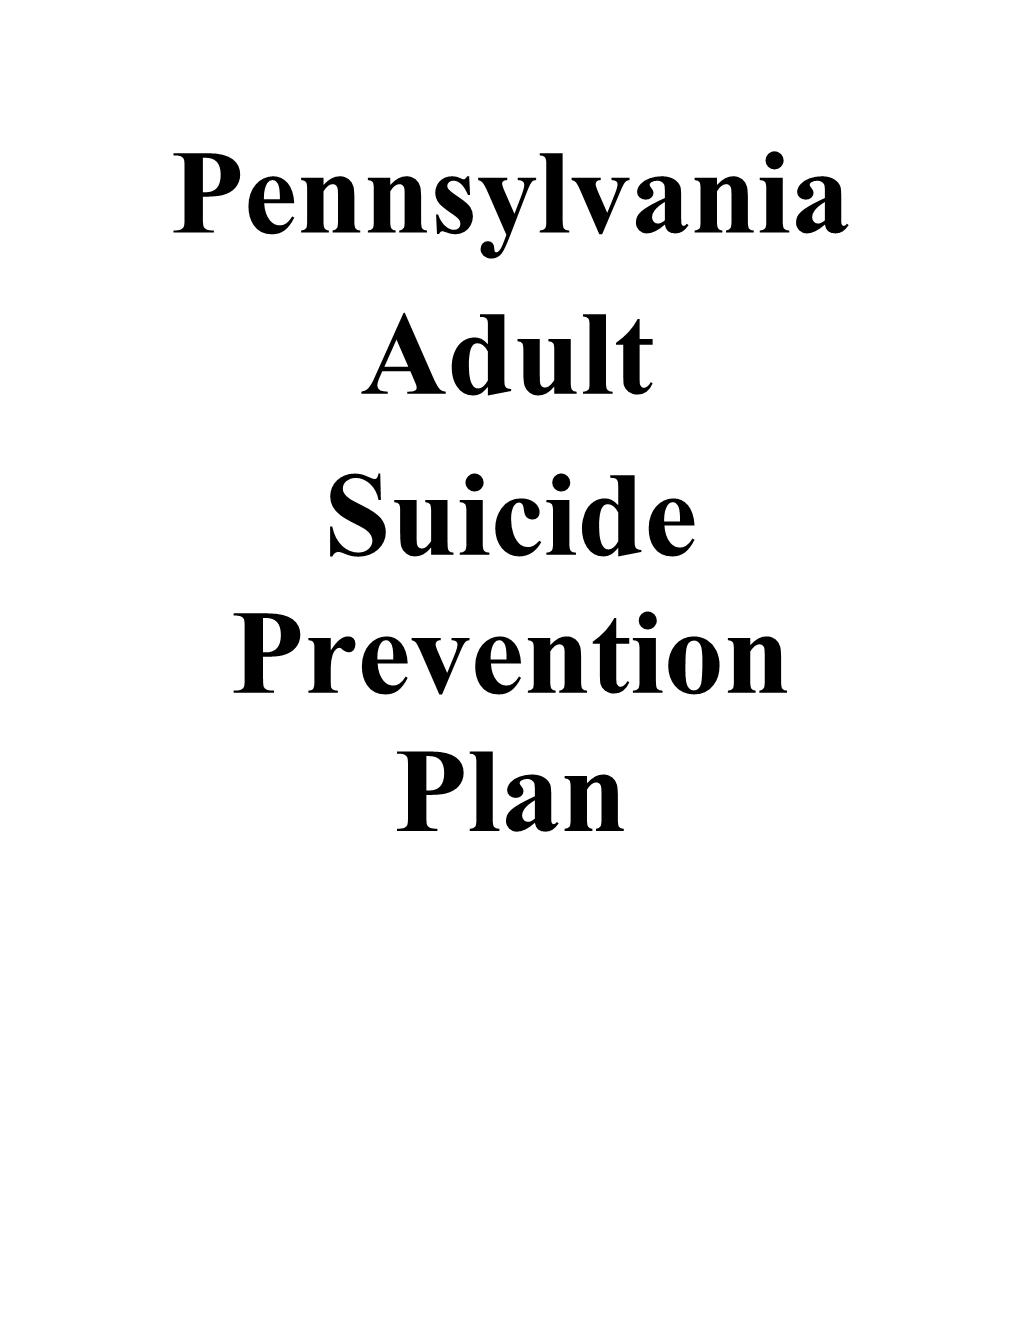 Pennsylvania Strategy for Adult Suicide Prevention: Goals And